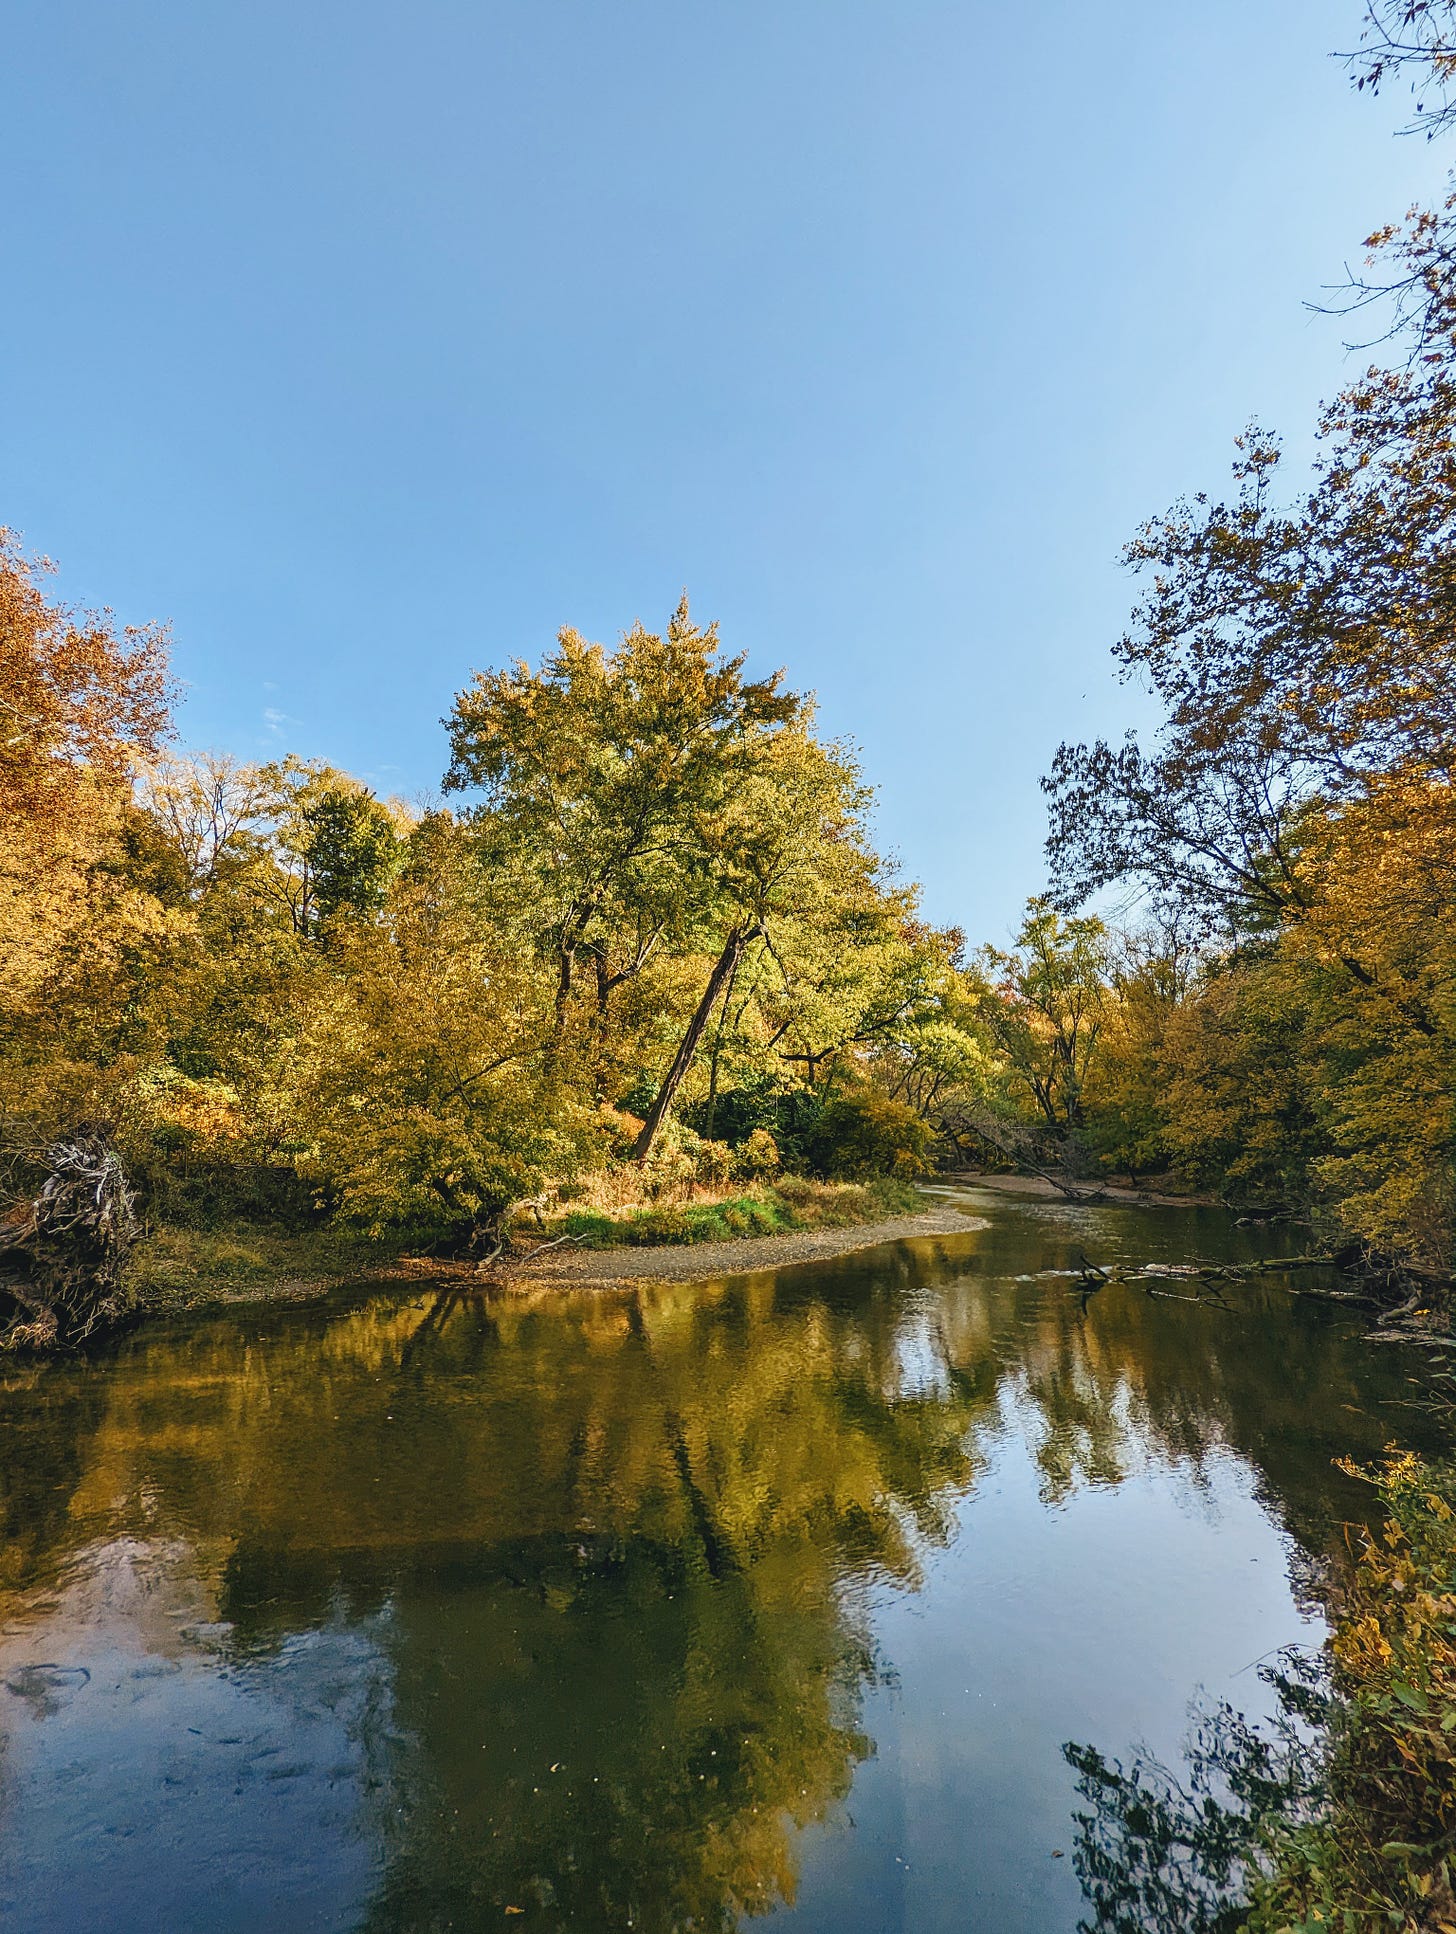 A small river reflects the green and yellow leaves of the forest below a cloudless blue sky.